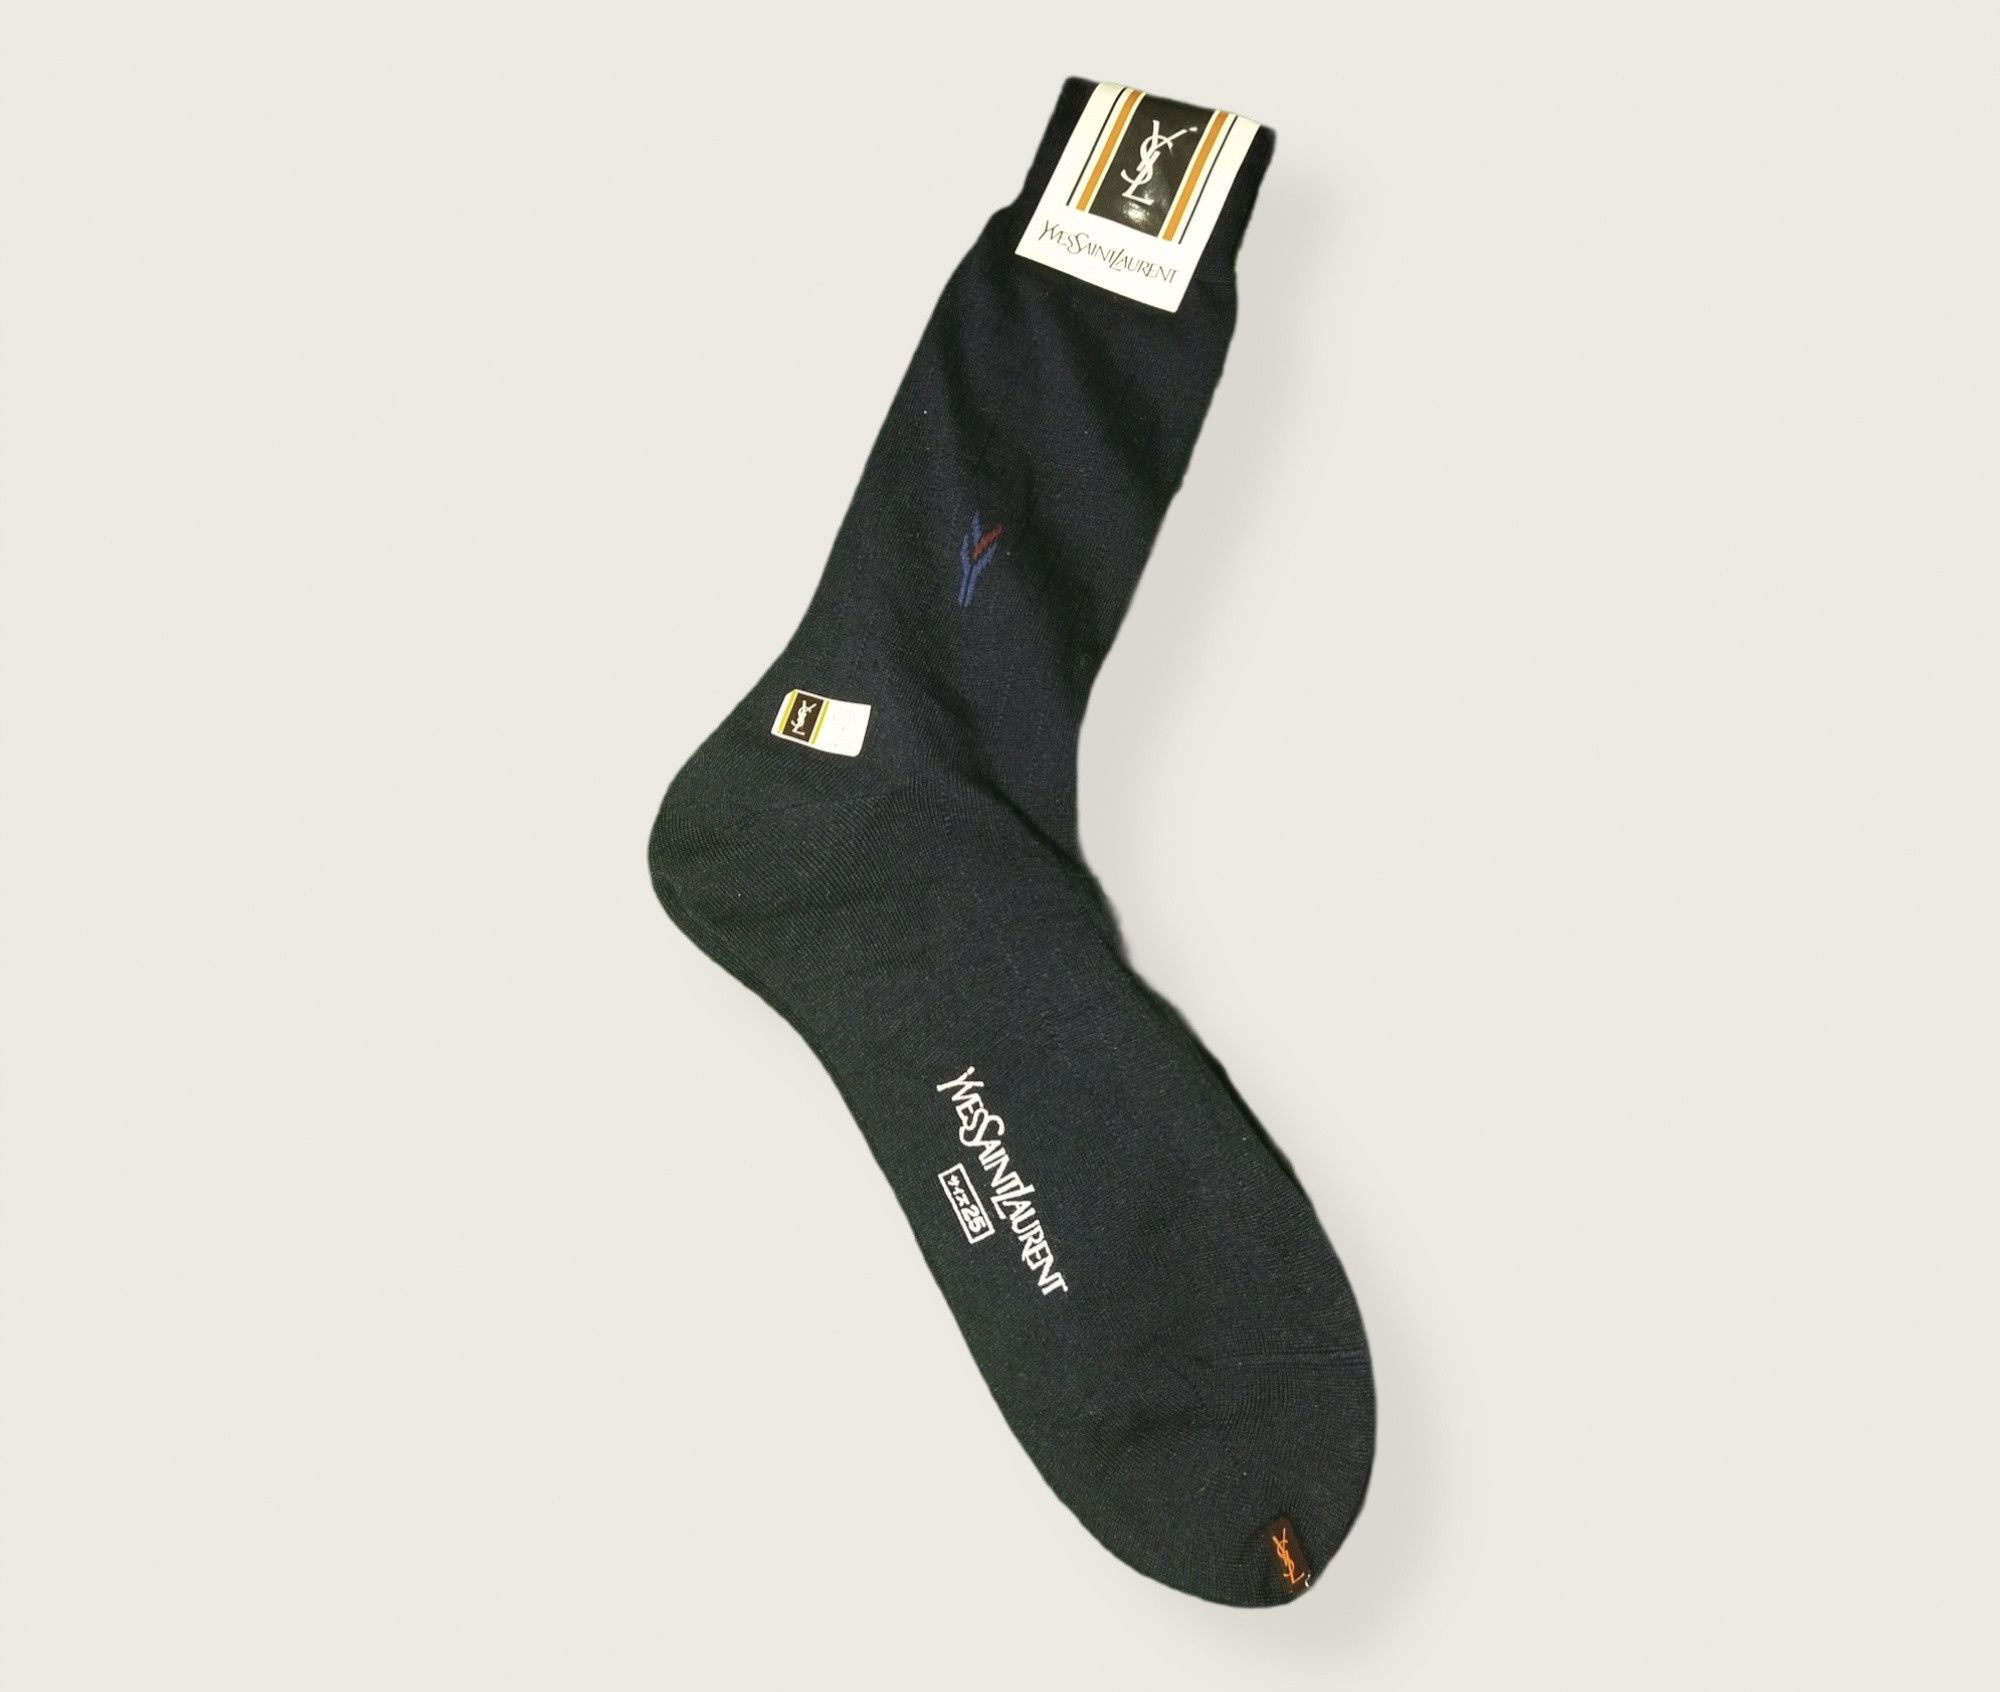 Yves Saint Laurent Ysl Sock Size ONE SIZE - 2 Preview